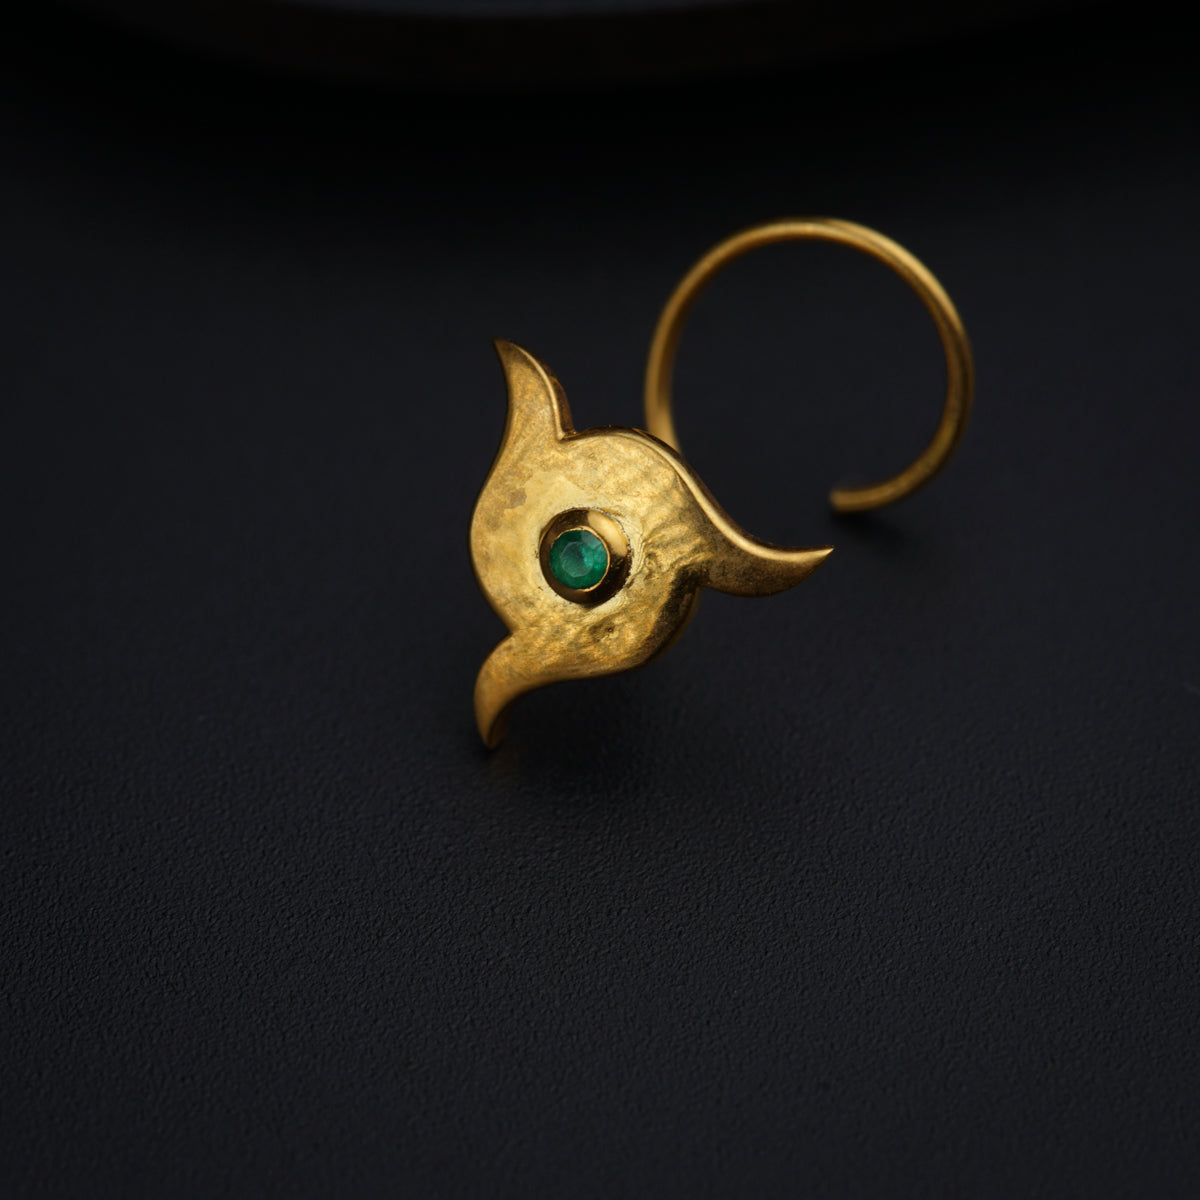 a close up of a gold ring with a green stone